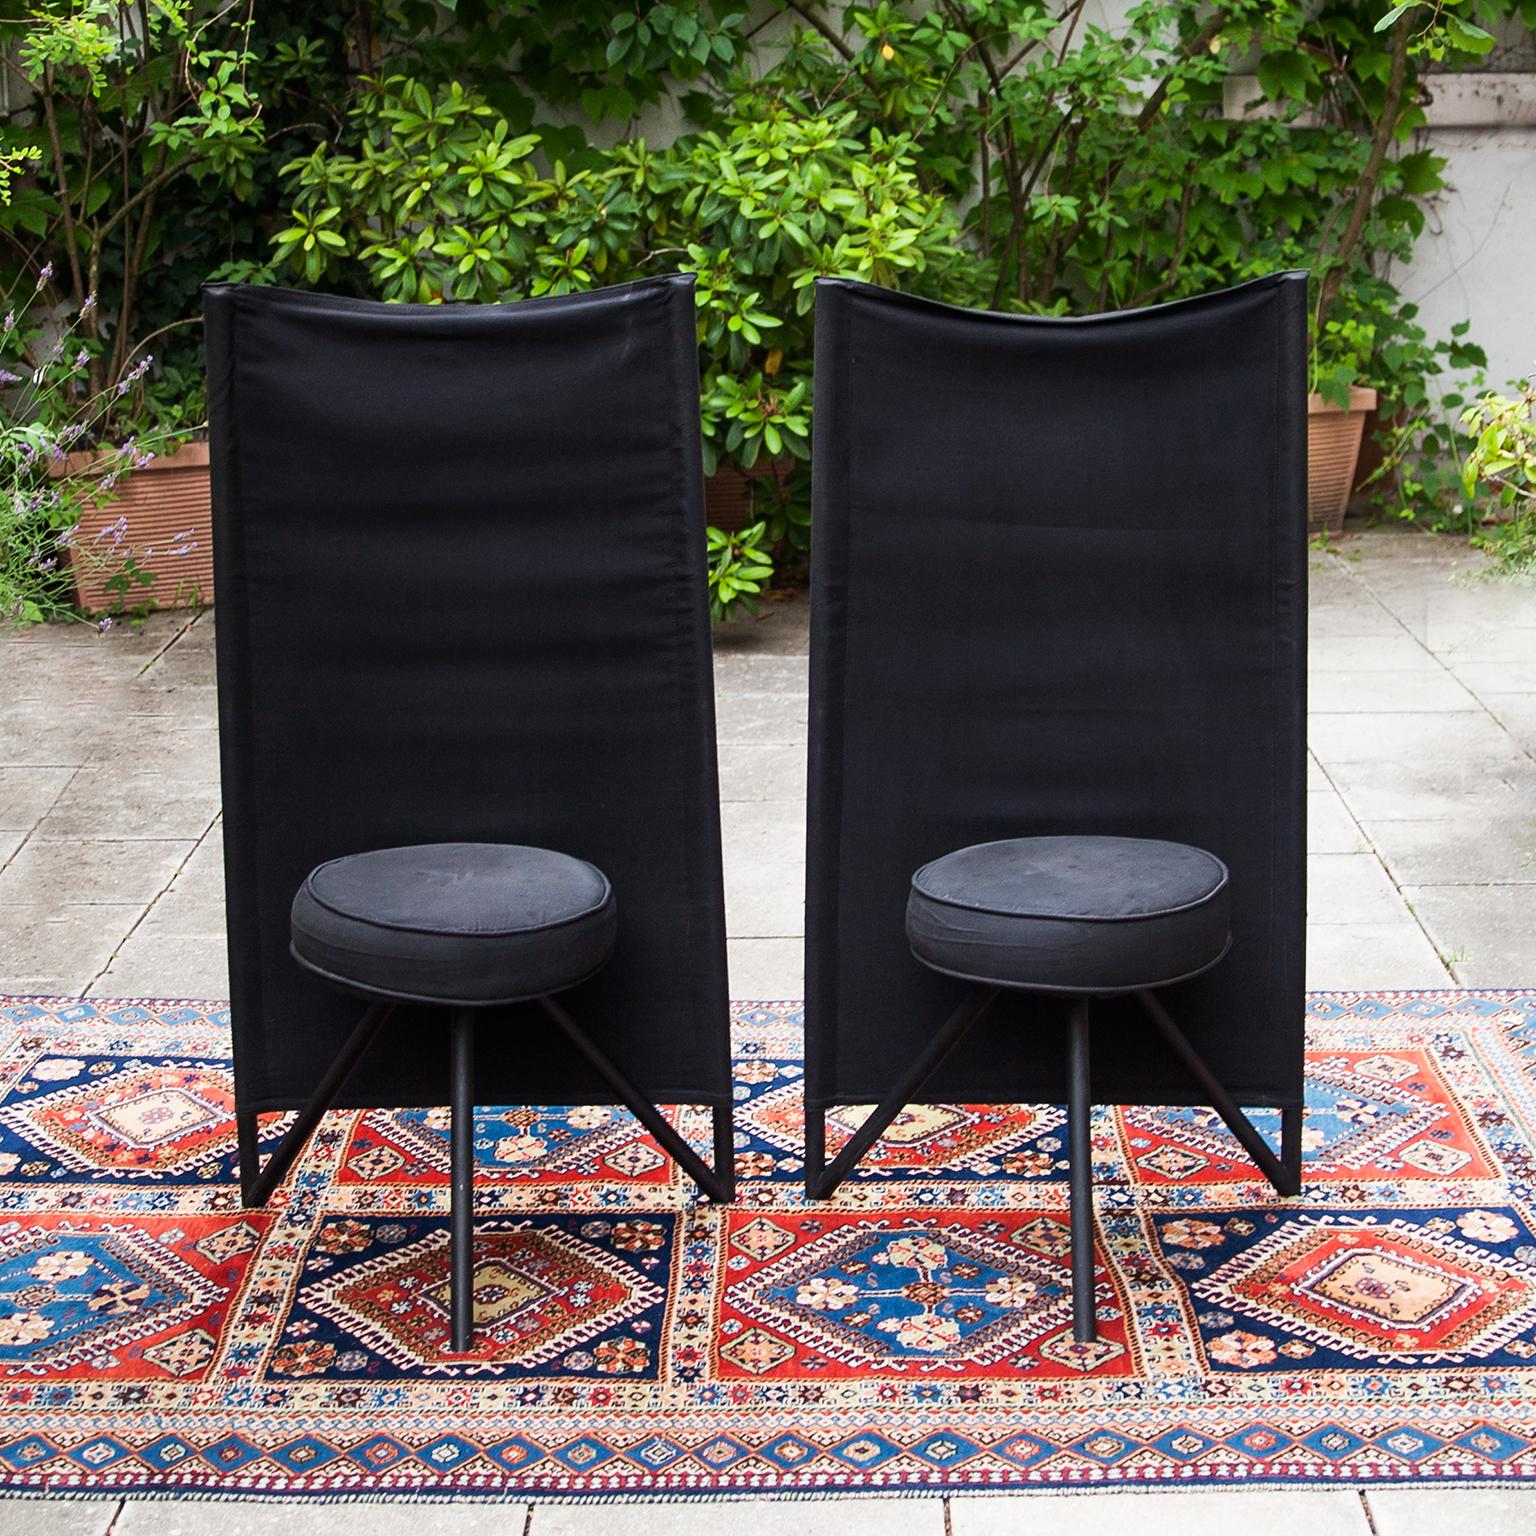 A rare and collectible chair designed by Philippe Starck in 1982 for Disform. Black cotton canvas fabric is stretched over two vertical steel tubes and the tension creates the comfortable back of the chair. The seat has a matching cotton canvas